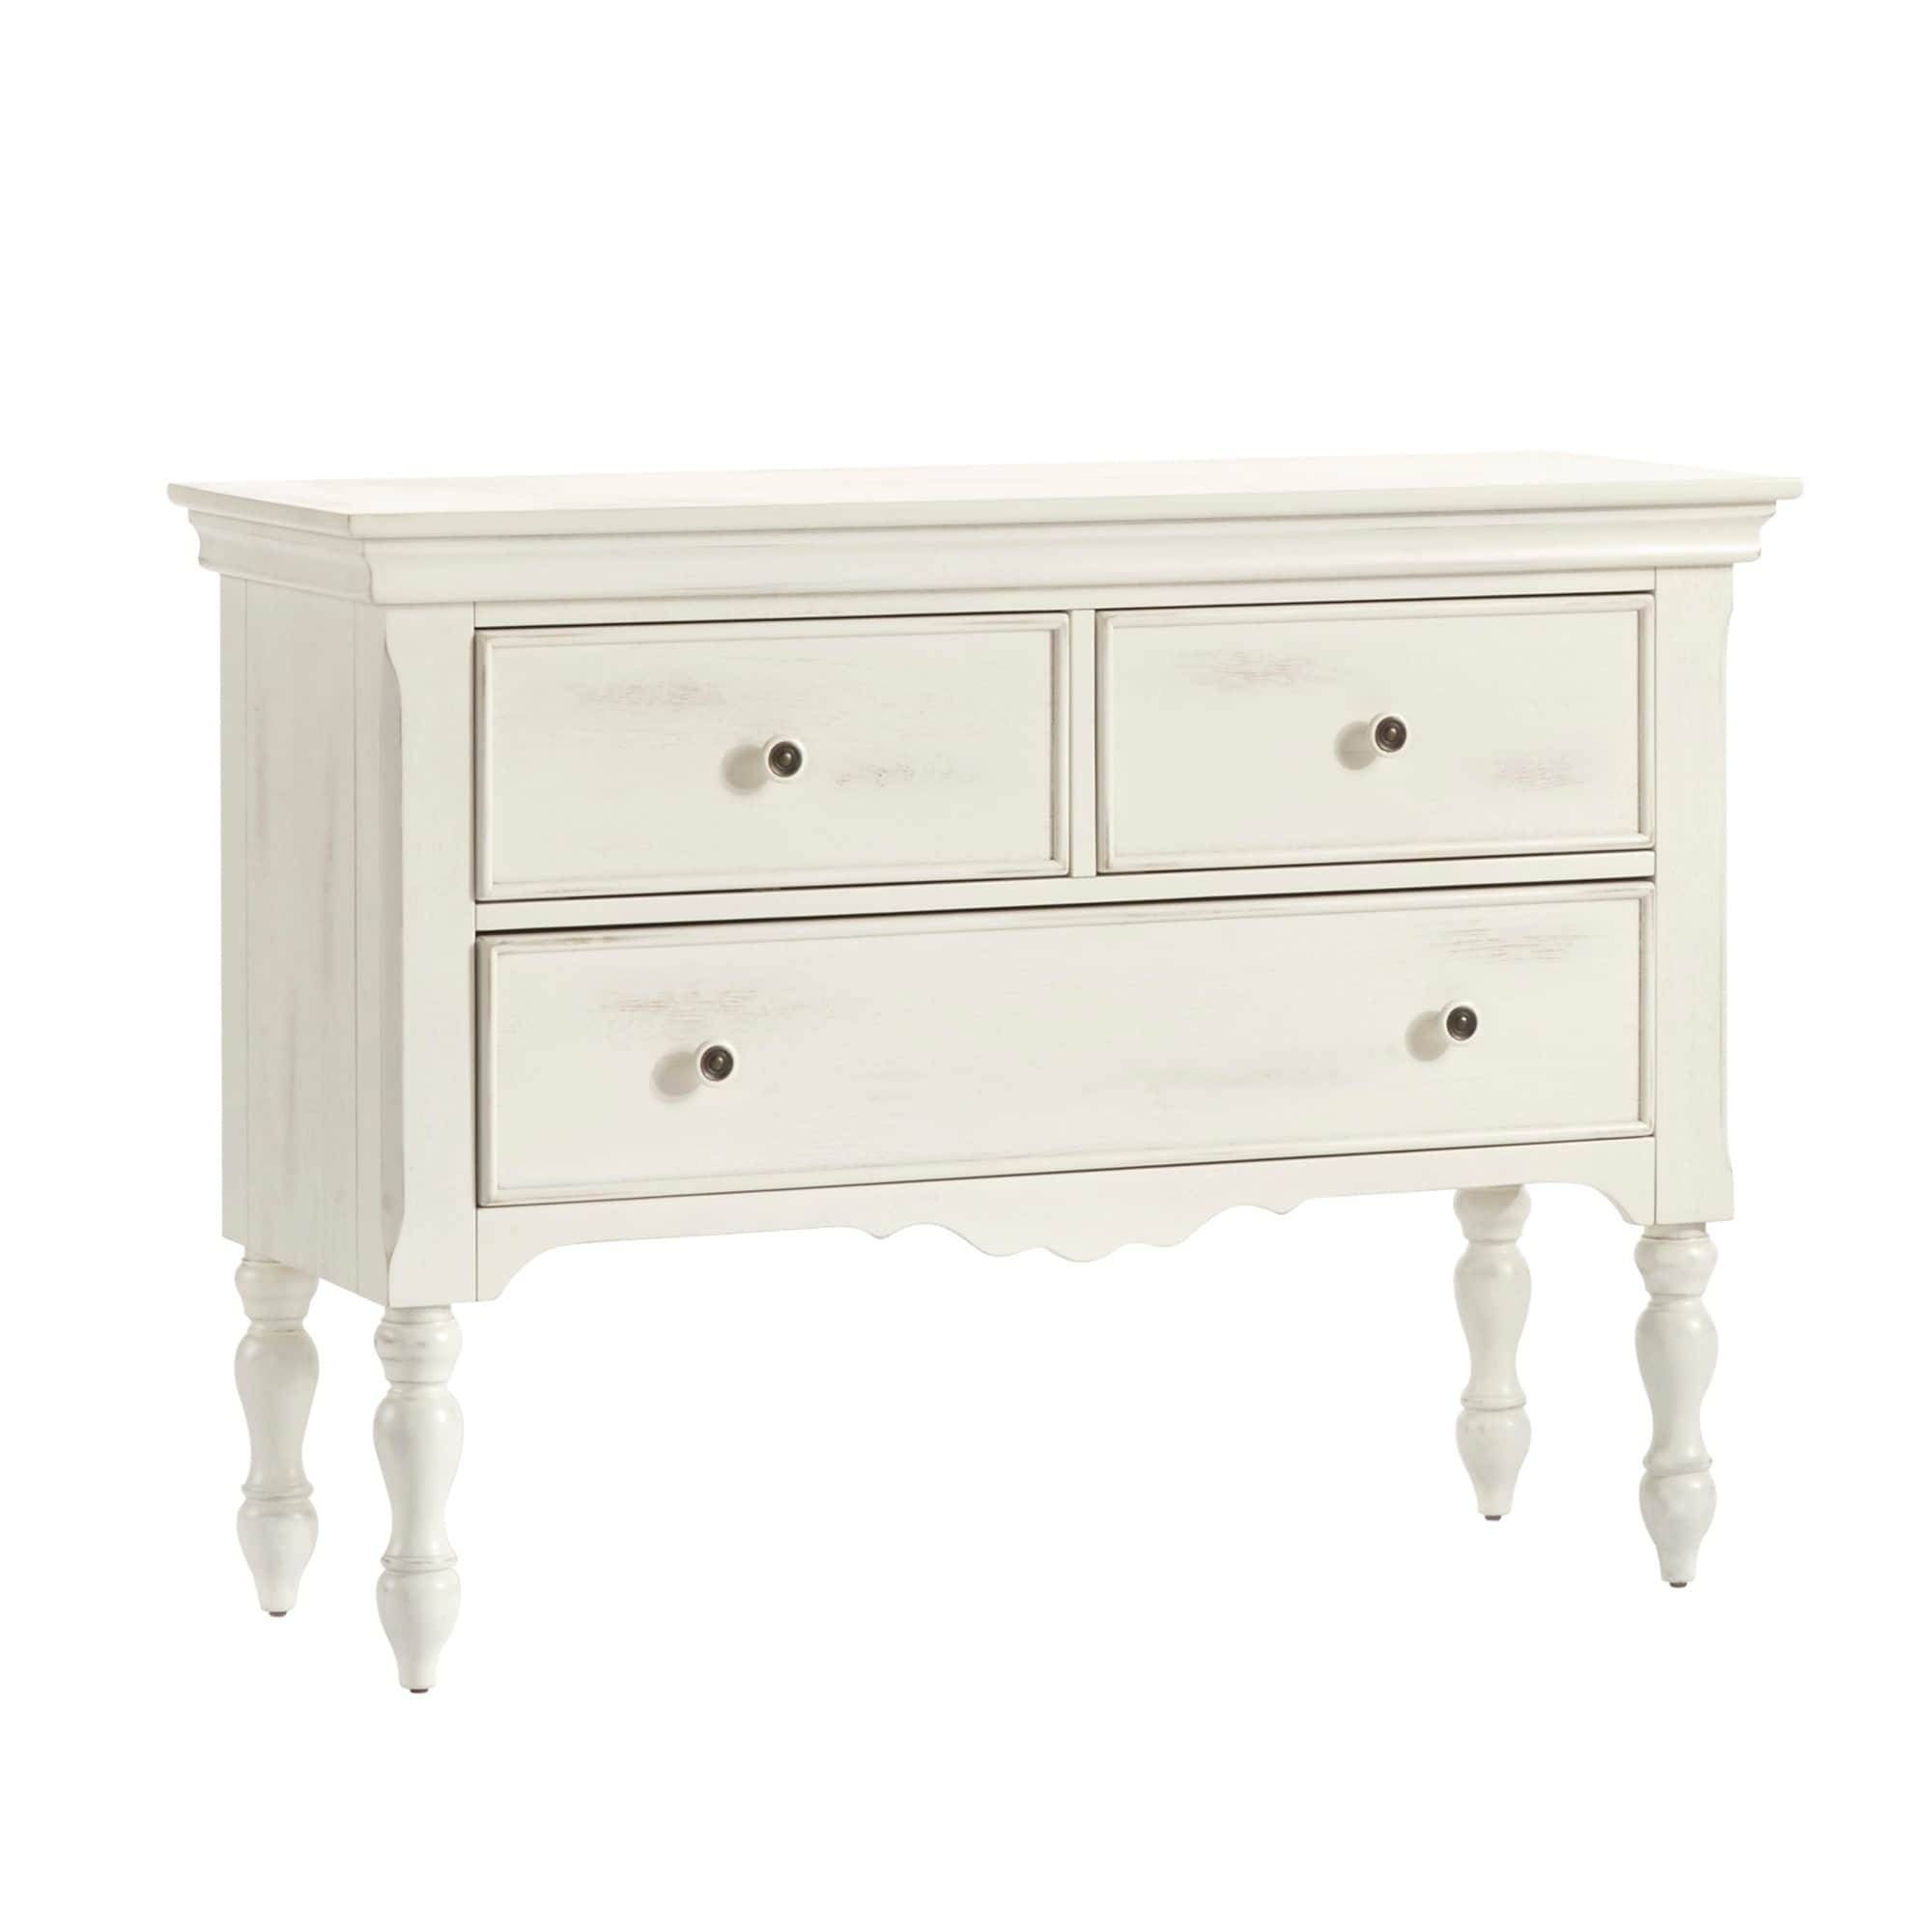 Mckay Country Antique White Buffet Storage Serverinspire Q Intended For Antique White Sideboards (Photo 7 of 15)